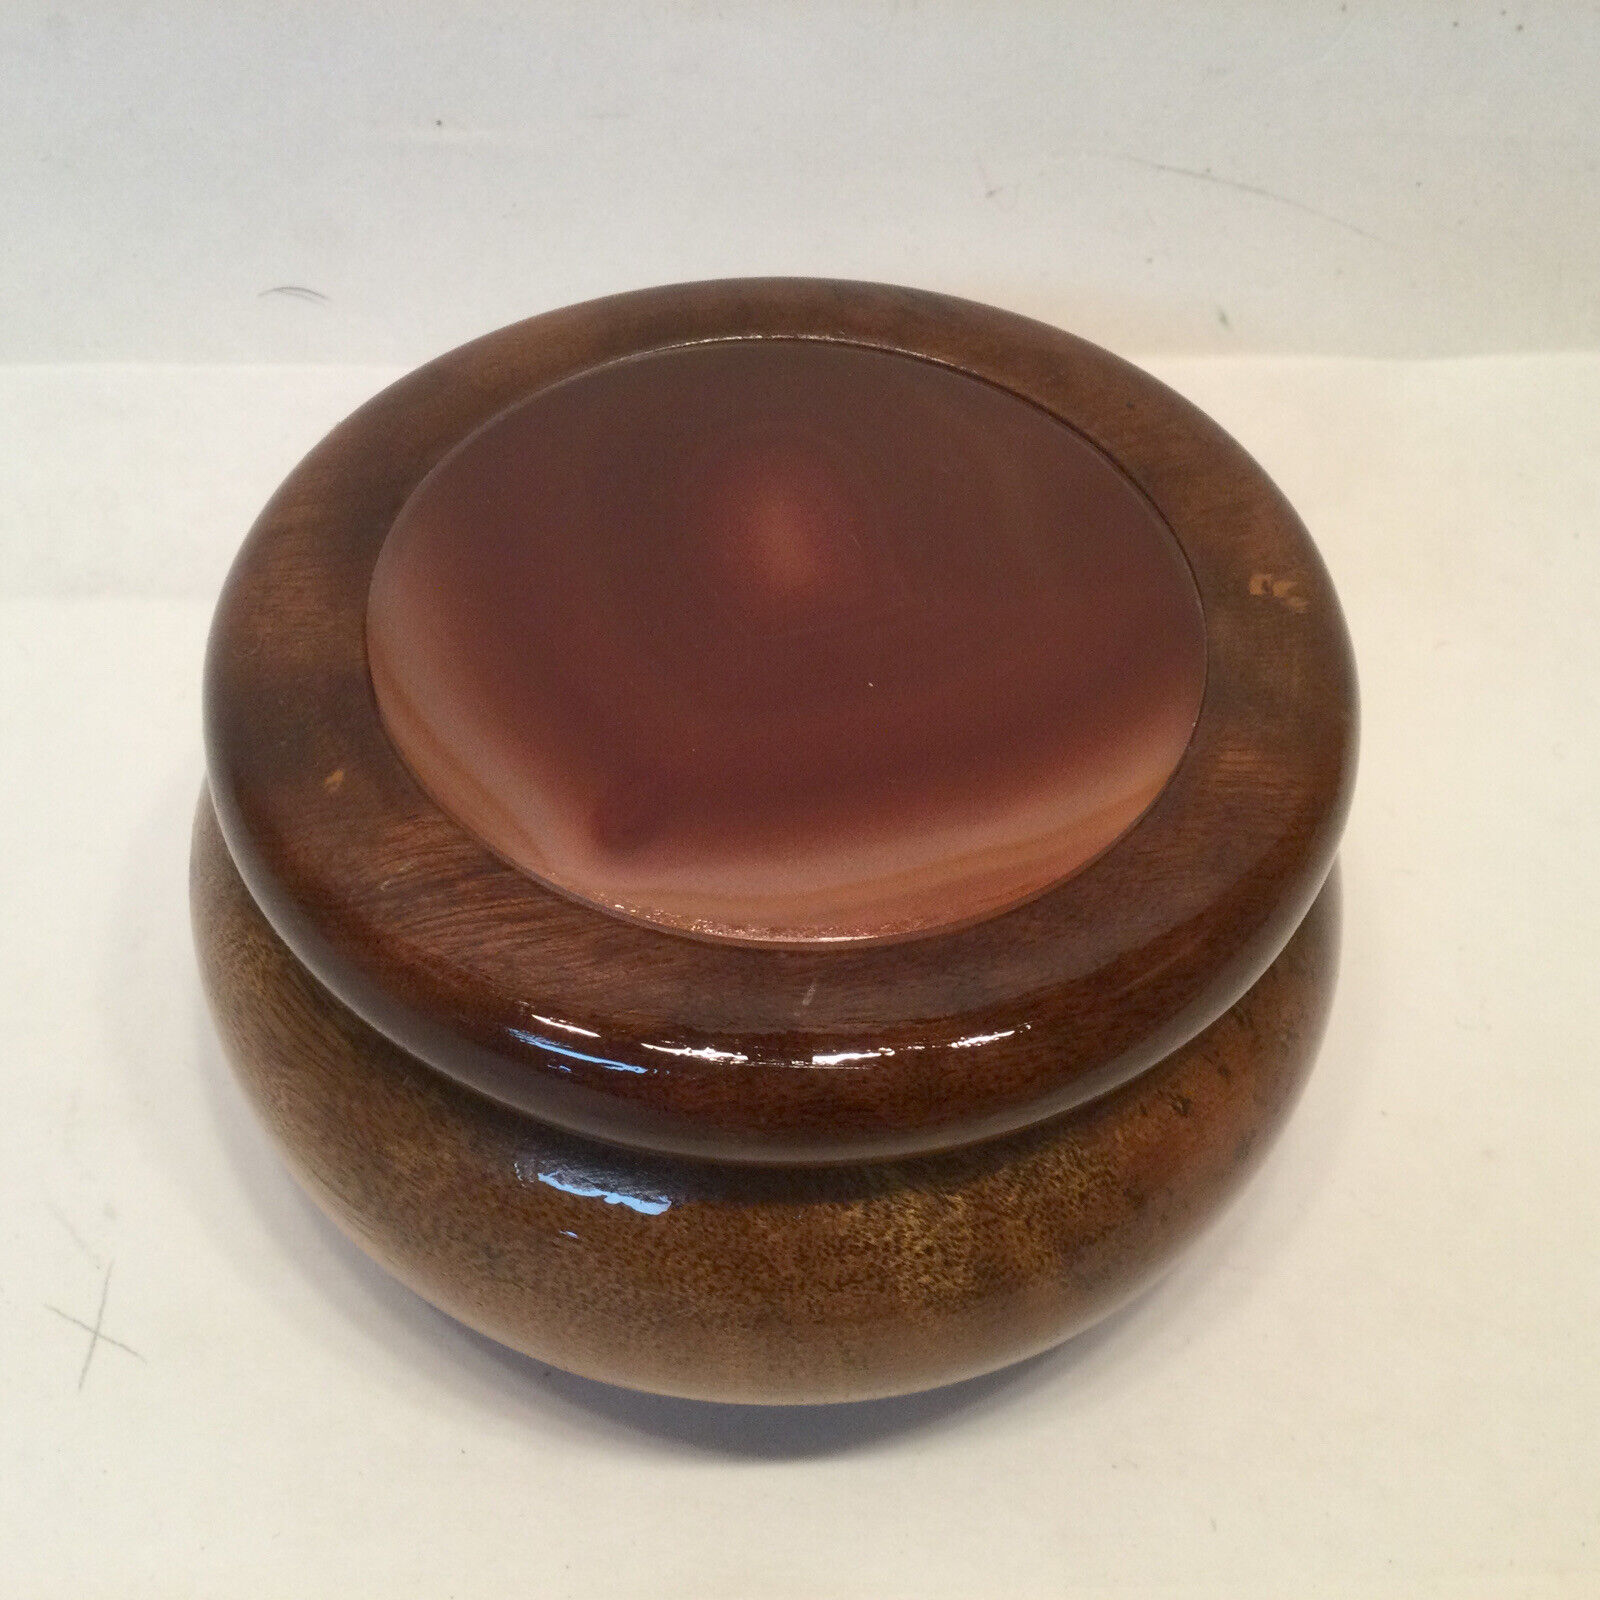 Vintage Hand Crafted Mahogany Trinket Box w/ Agate Inlay Lid - Made in Brazil